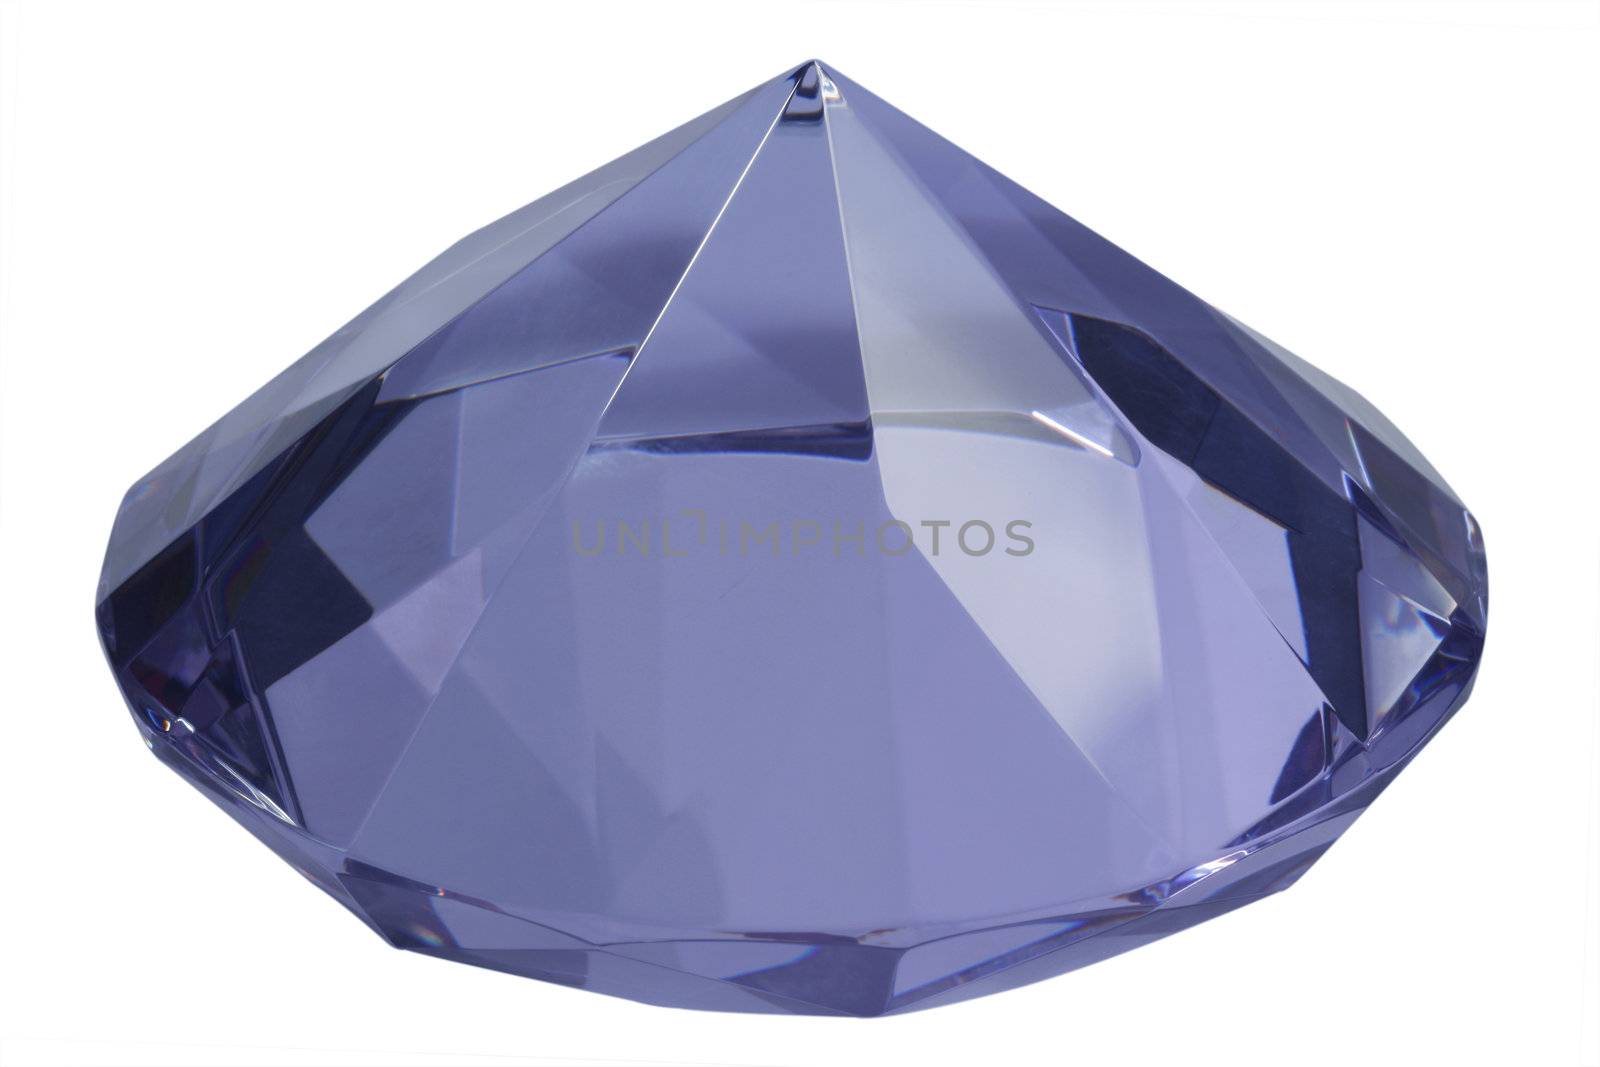 Blue diamond of glass - isolated on white background